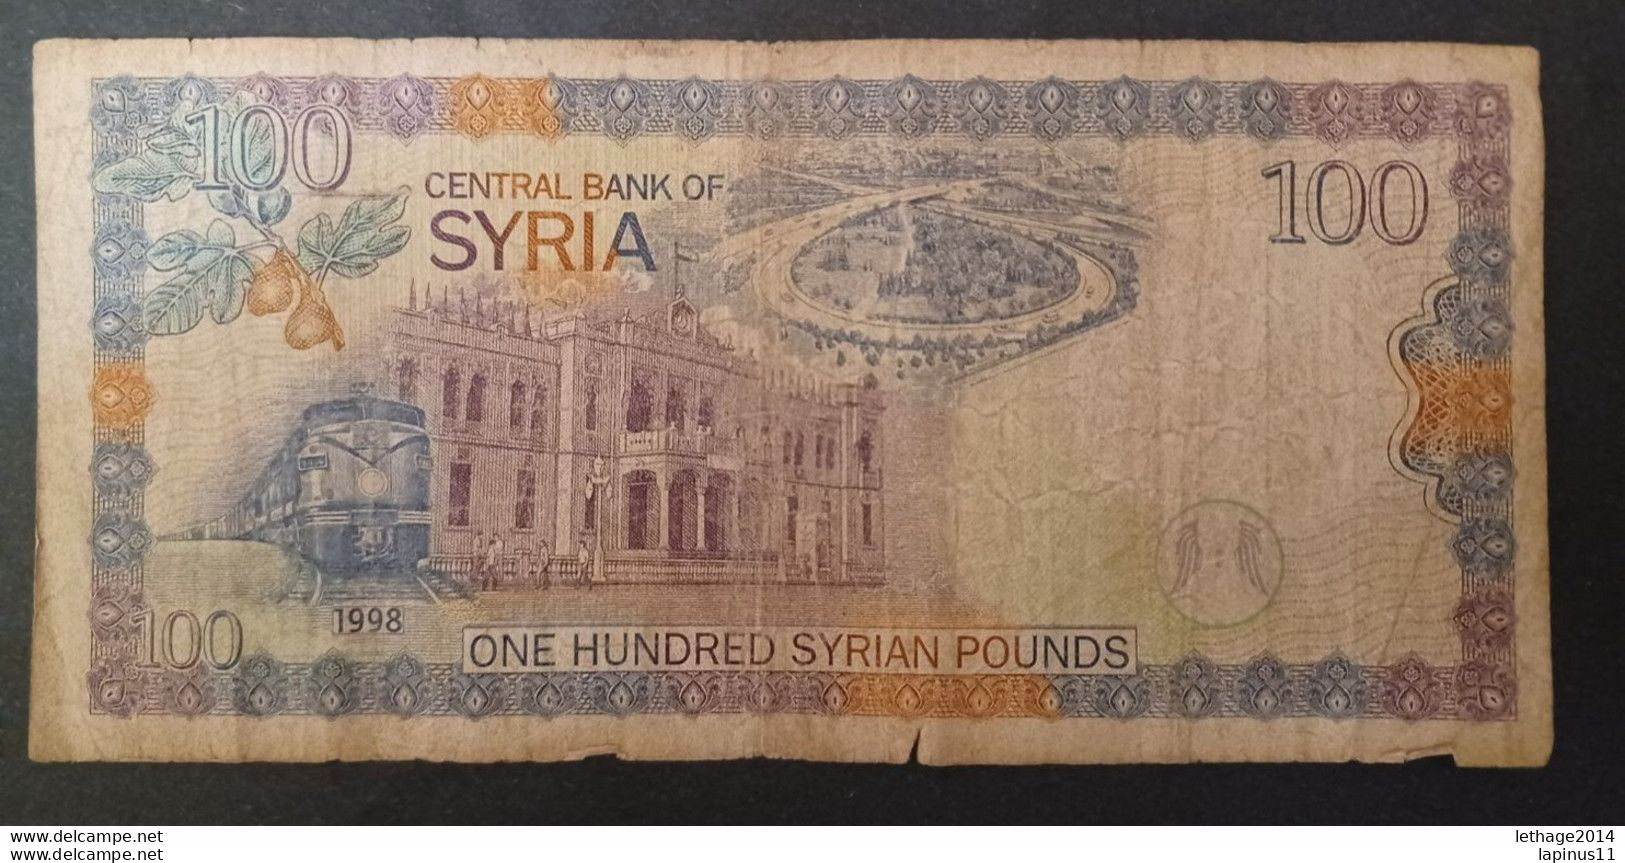 BANKNOTE سوريا SYRIA 100 POUNDS ALEPPO 1998 CIRCULATED - Syria